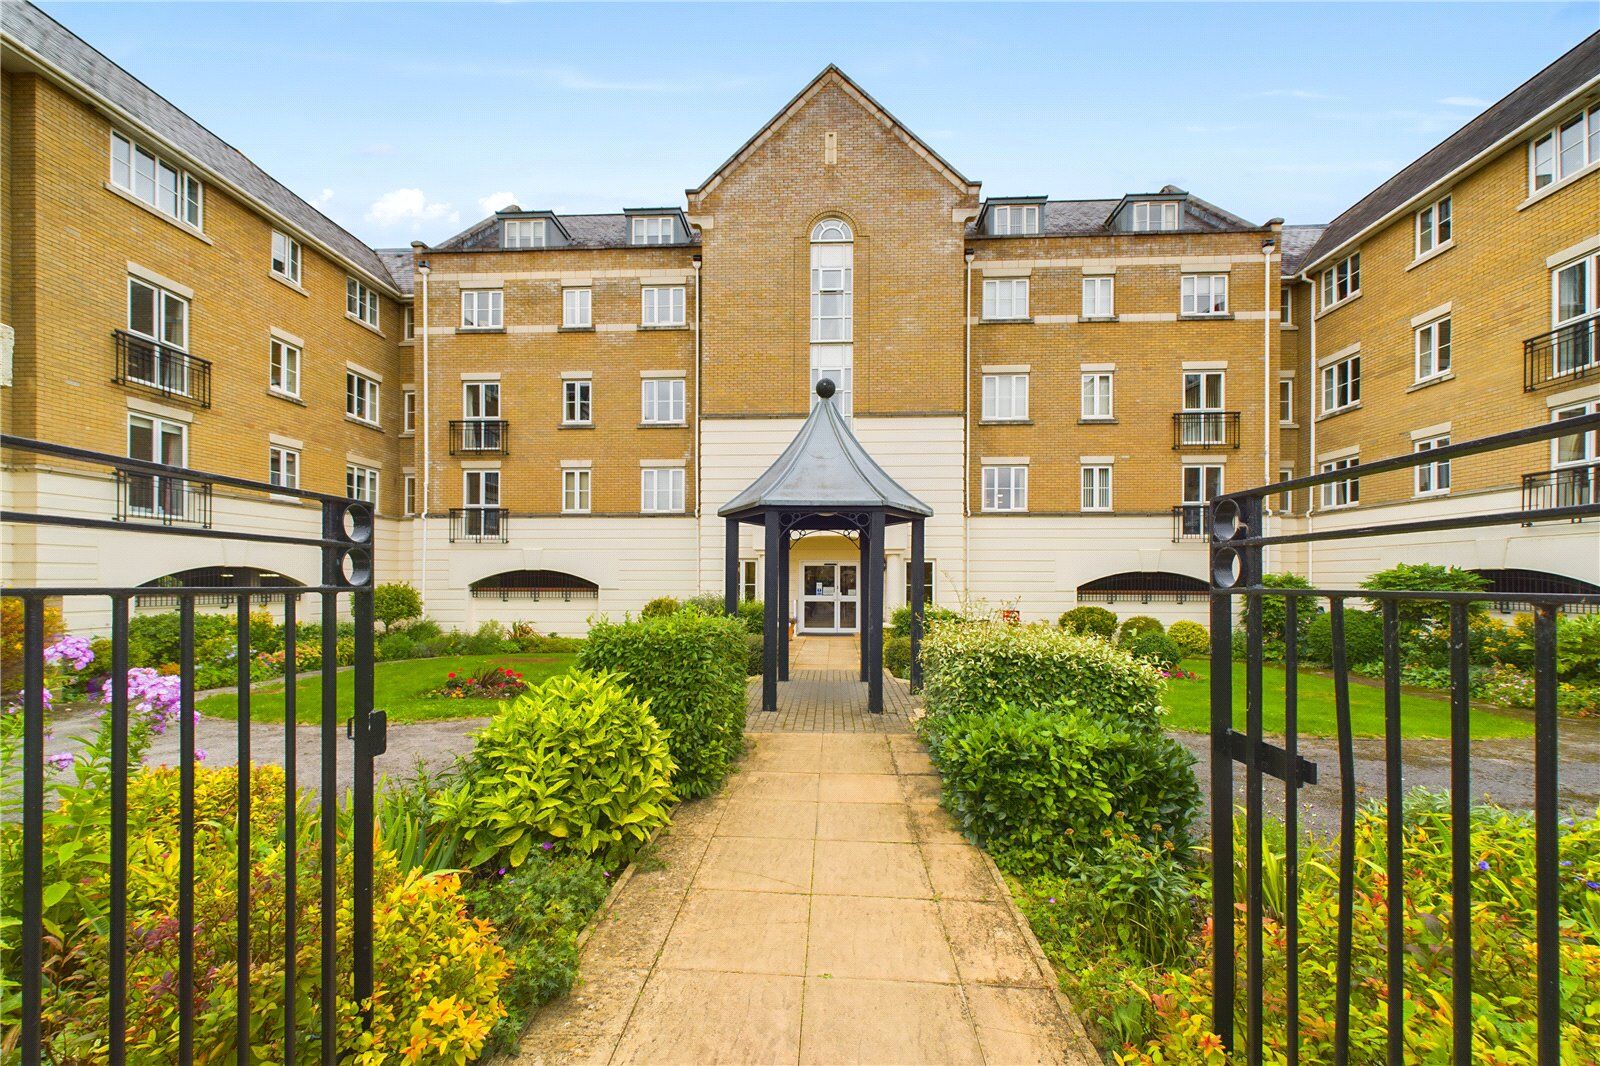 2 bedroom  flat for sale Crosshall Road, Eaton Ford, PE19, main image